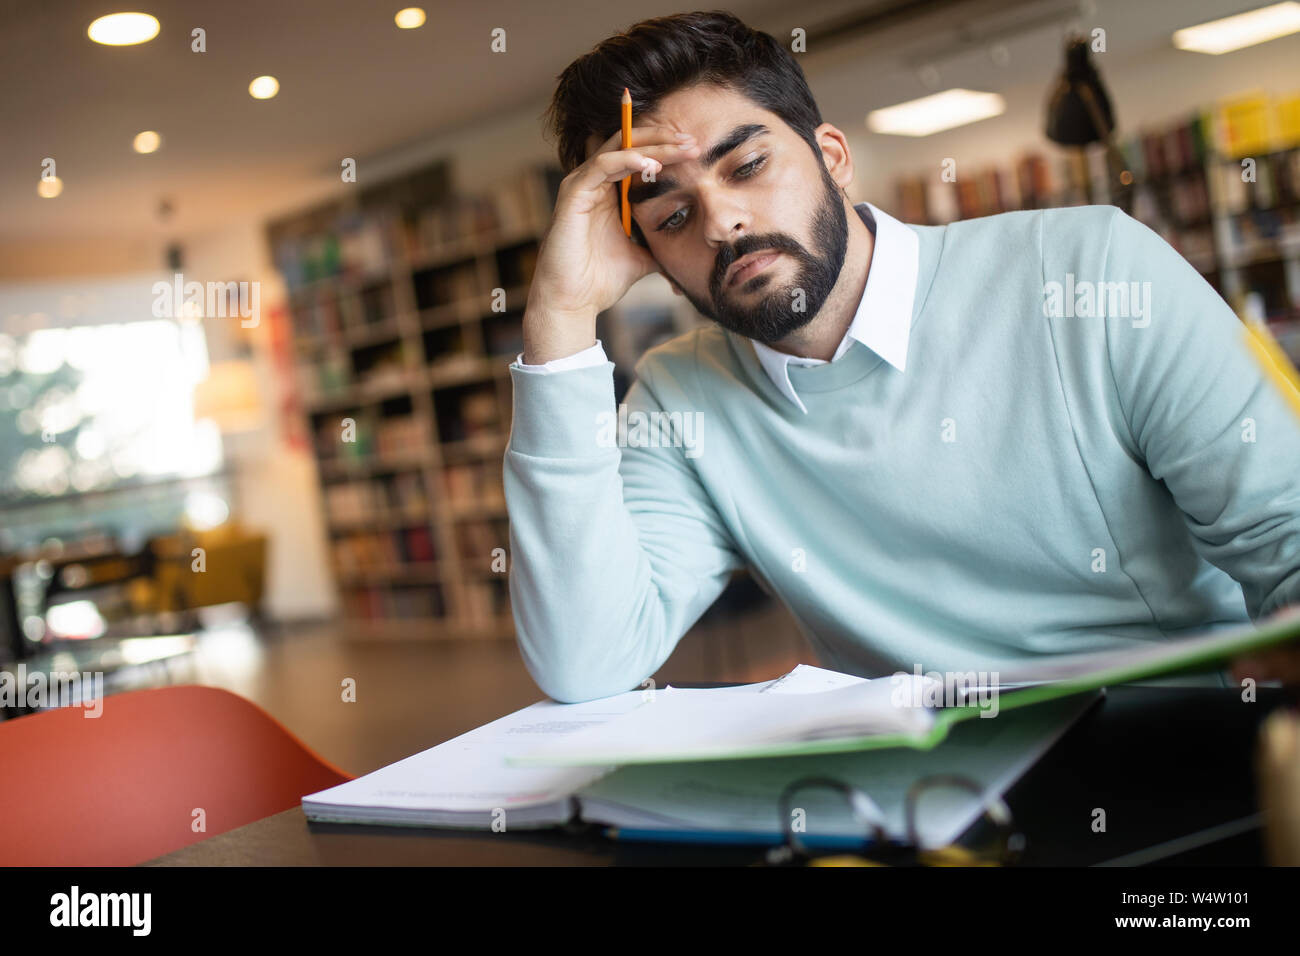 Exhausted young man student studying in a library Stock Photo